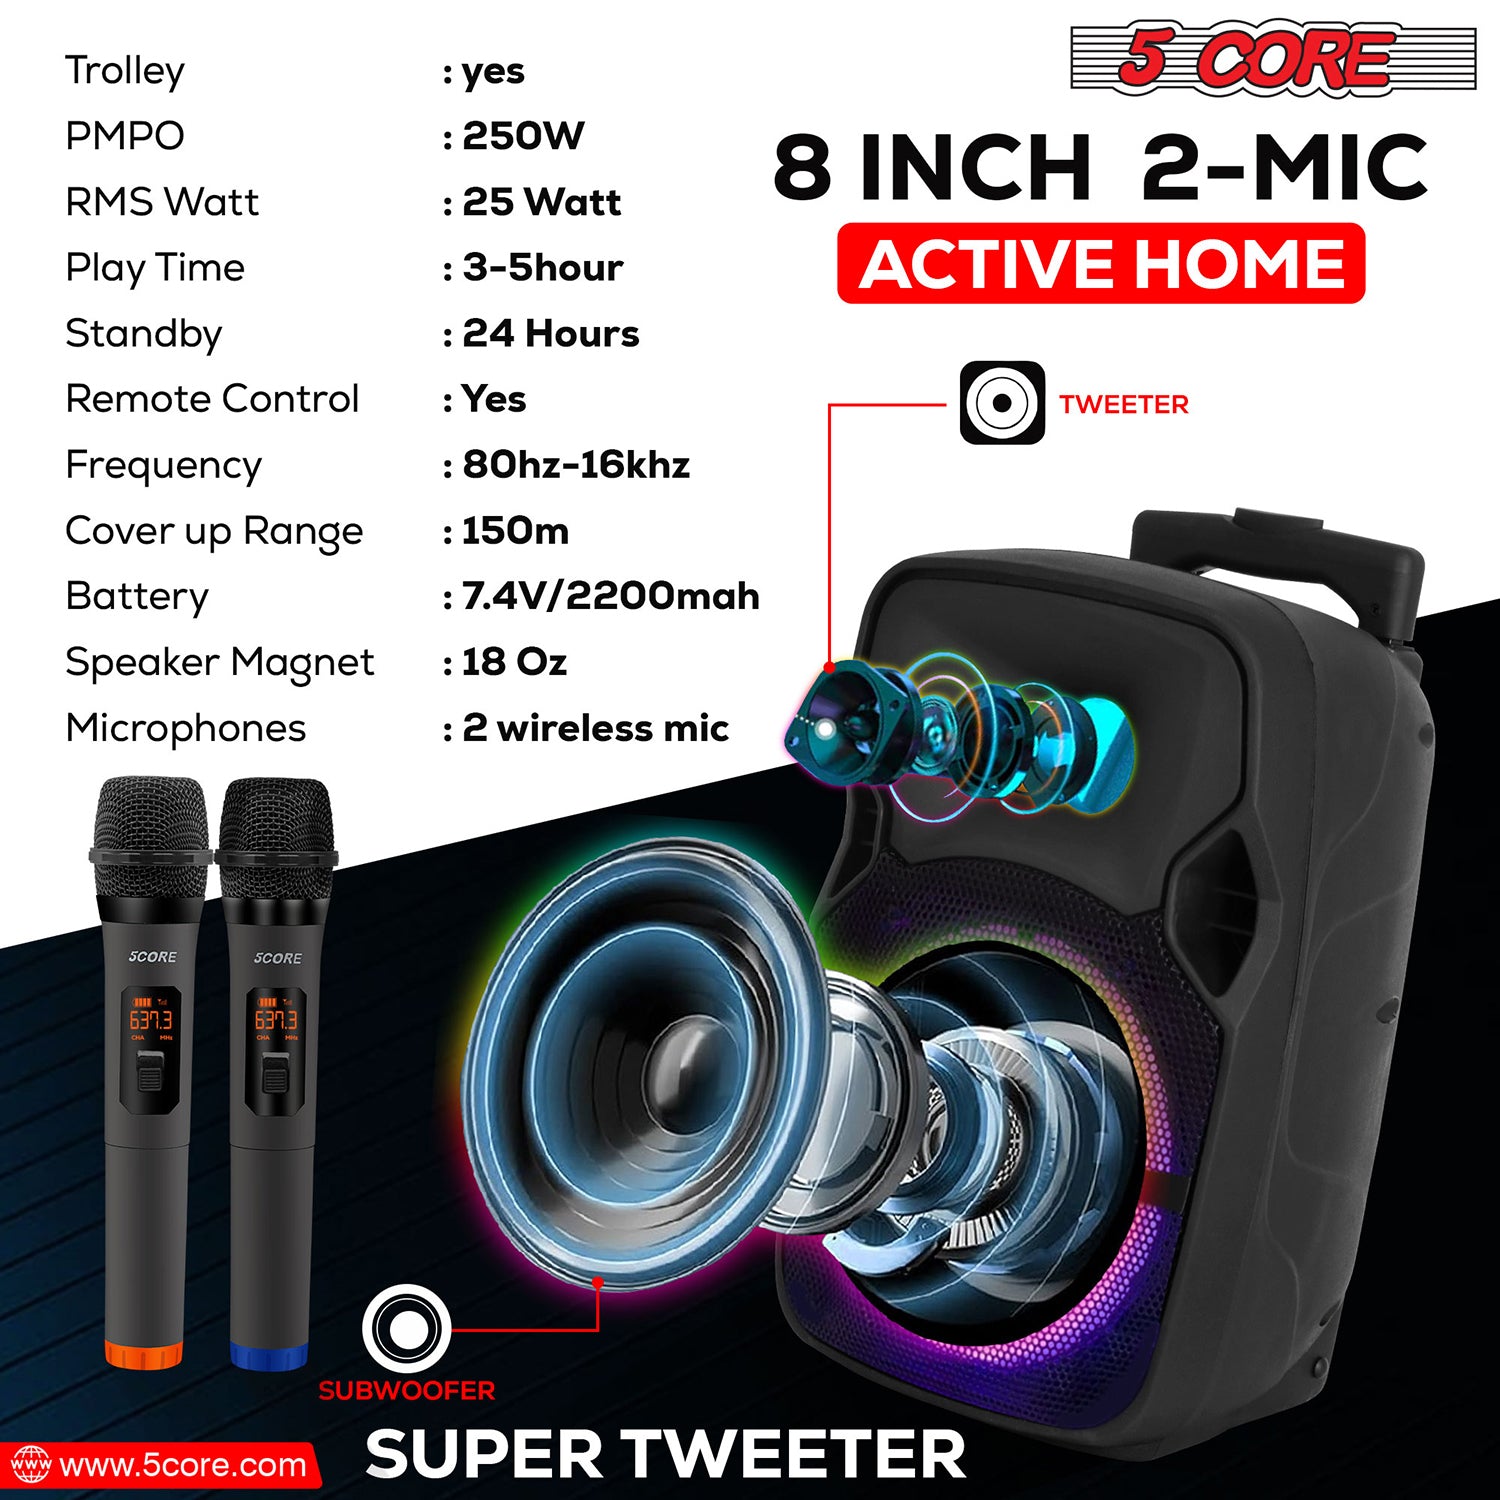 5Core Portable Party Speaker: Powerful PA system with Bluetooth, 2 wireless mics, ideal for DJ and karaoke events.